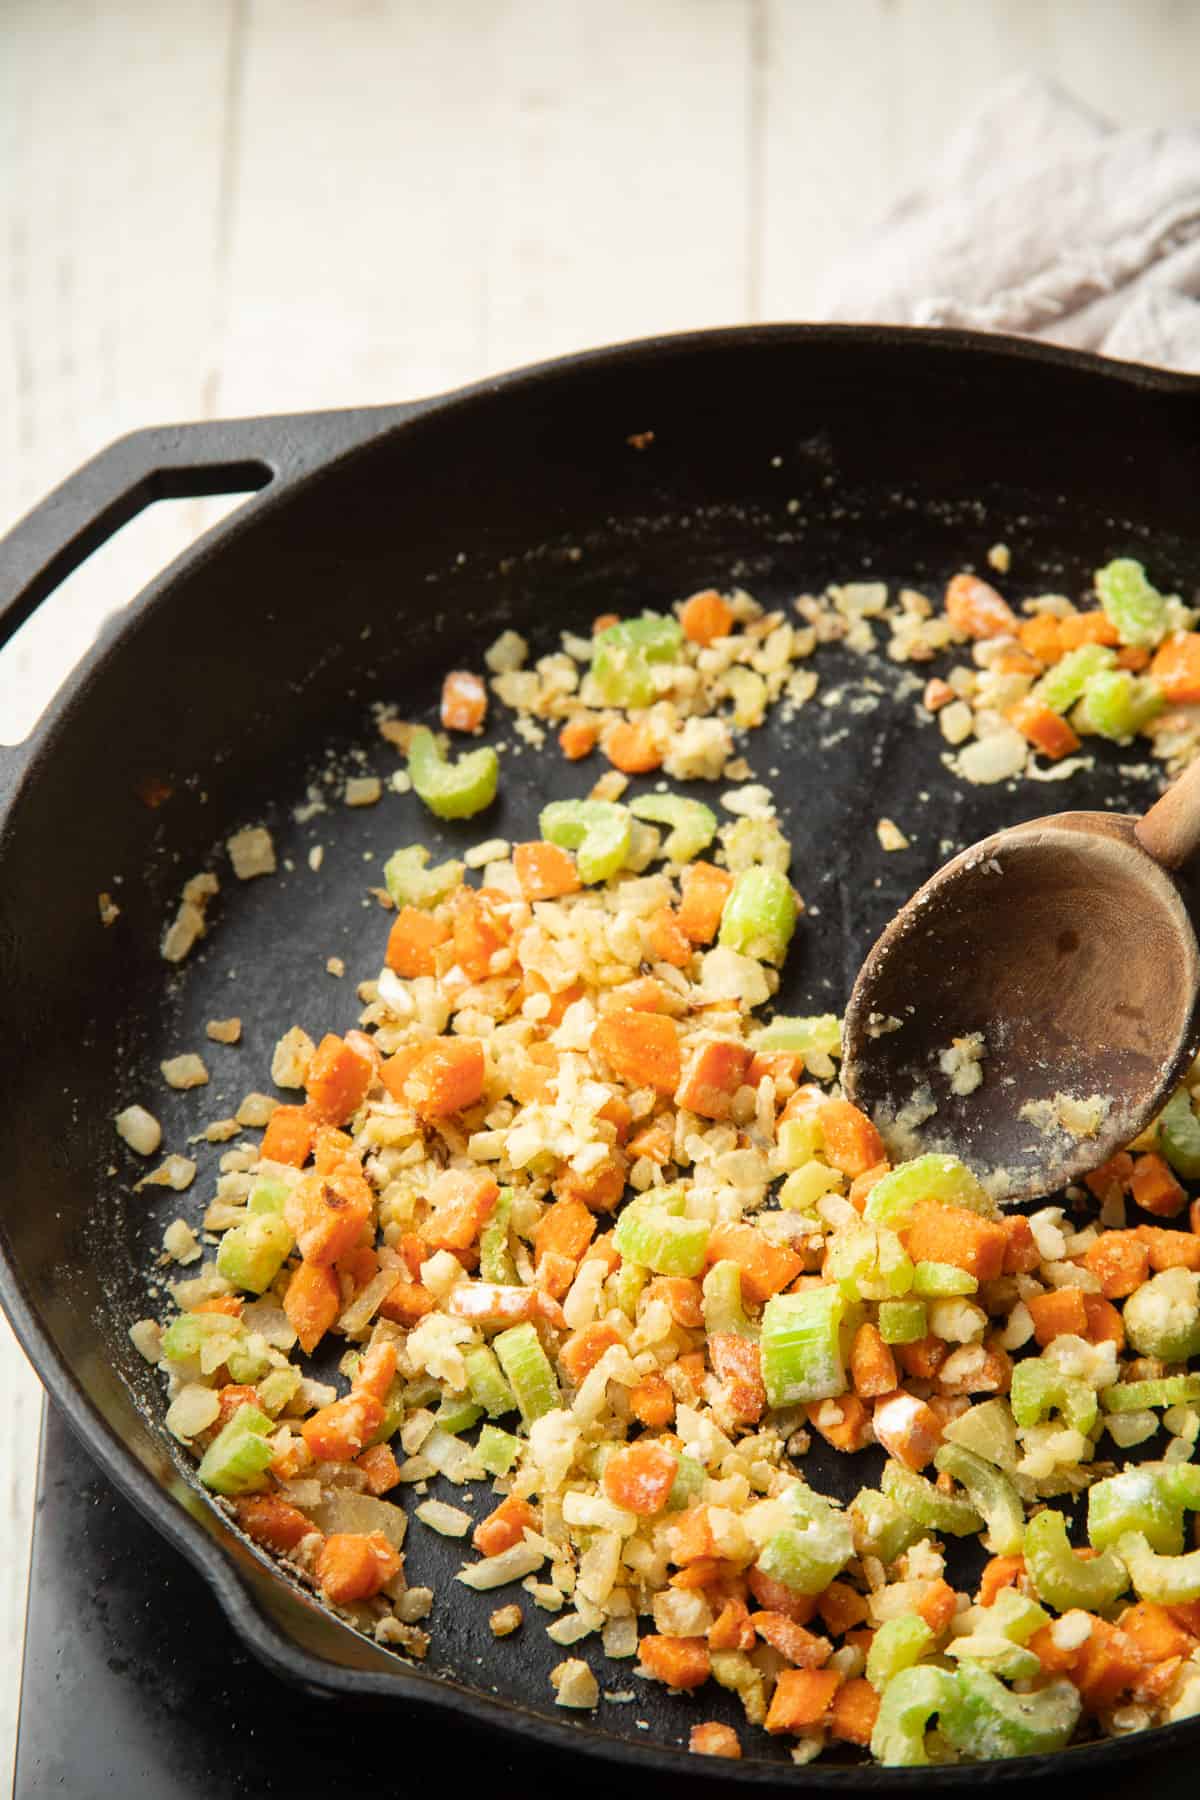 Celery, carrots, onion, garlic and flour cooking in a skillet.